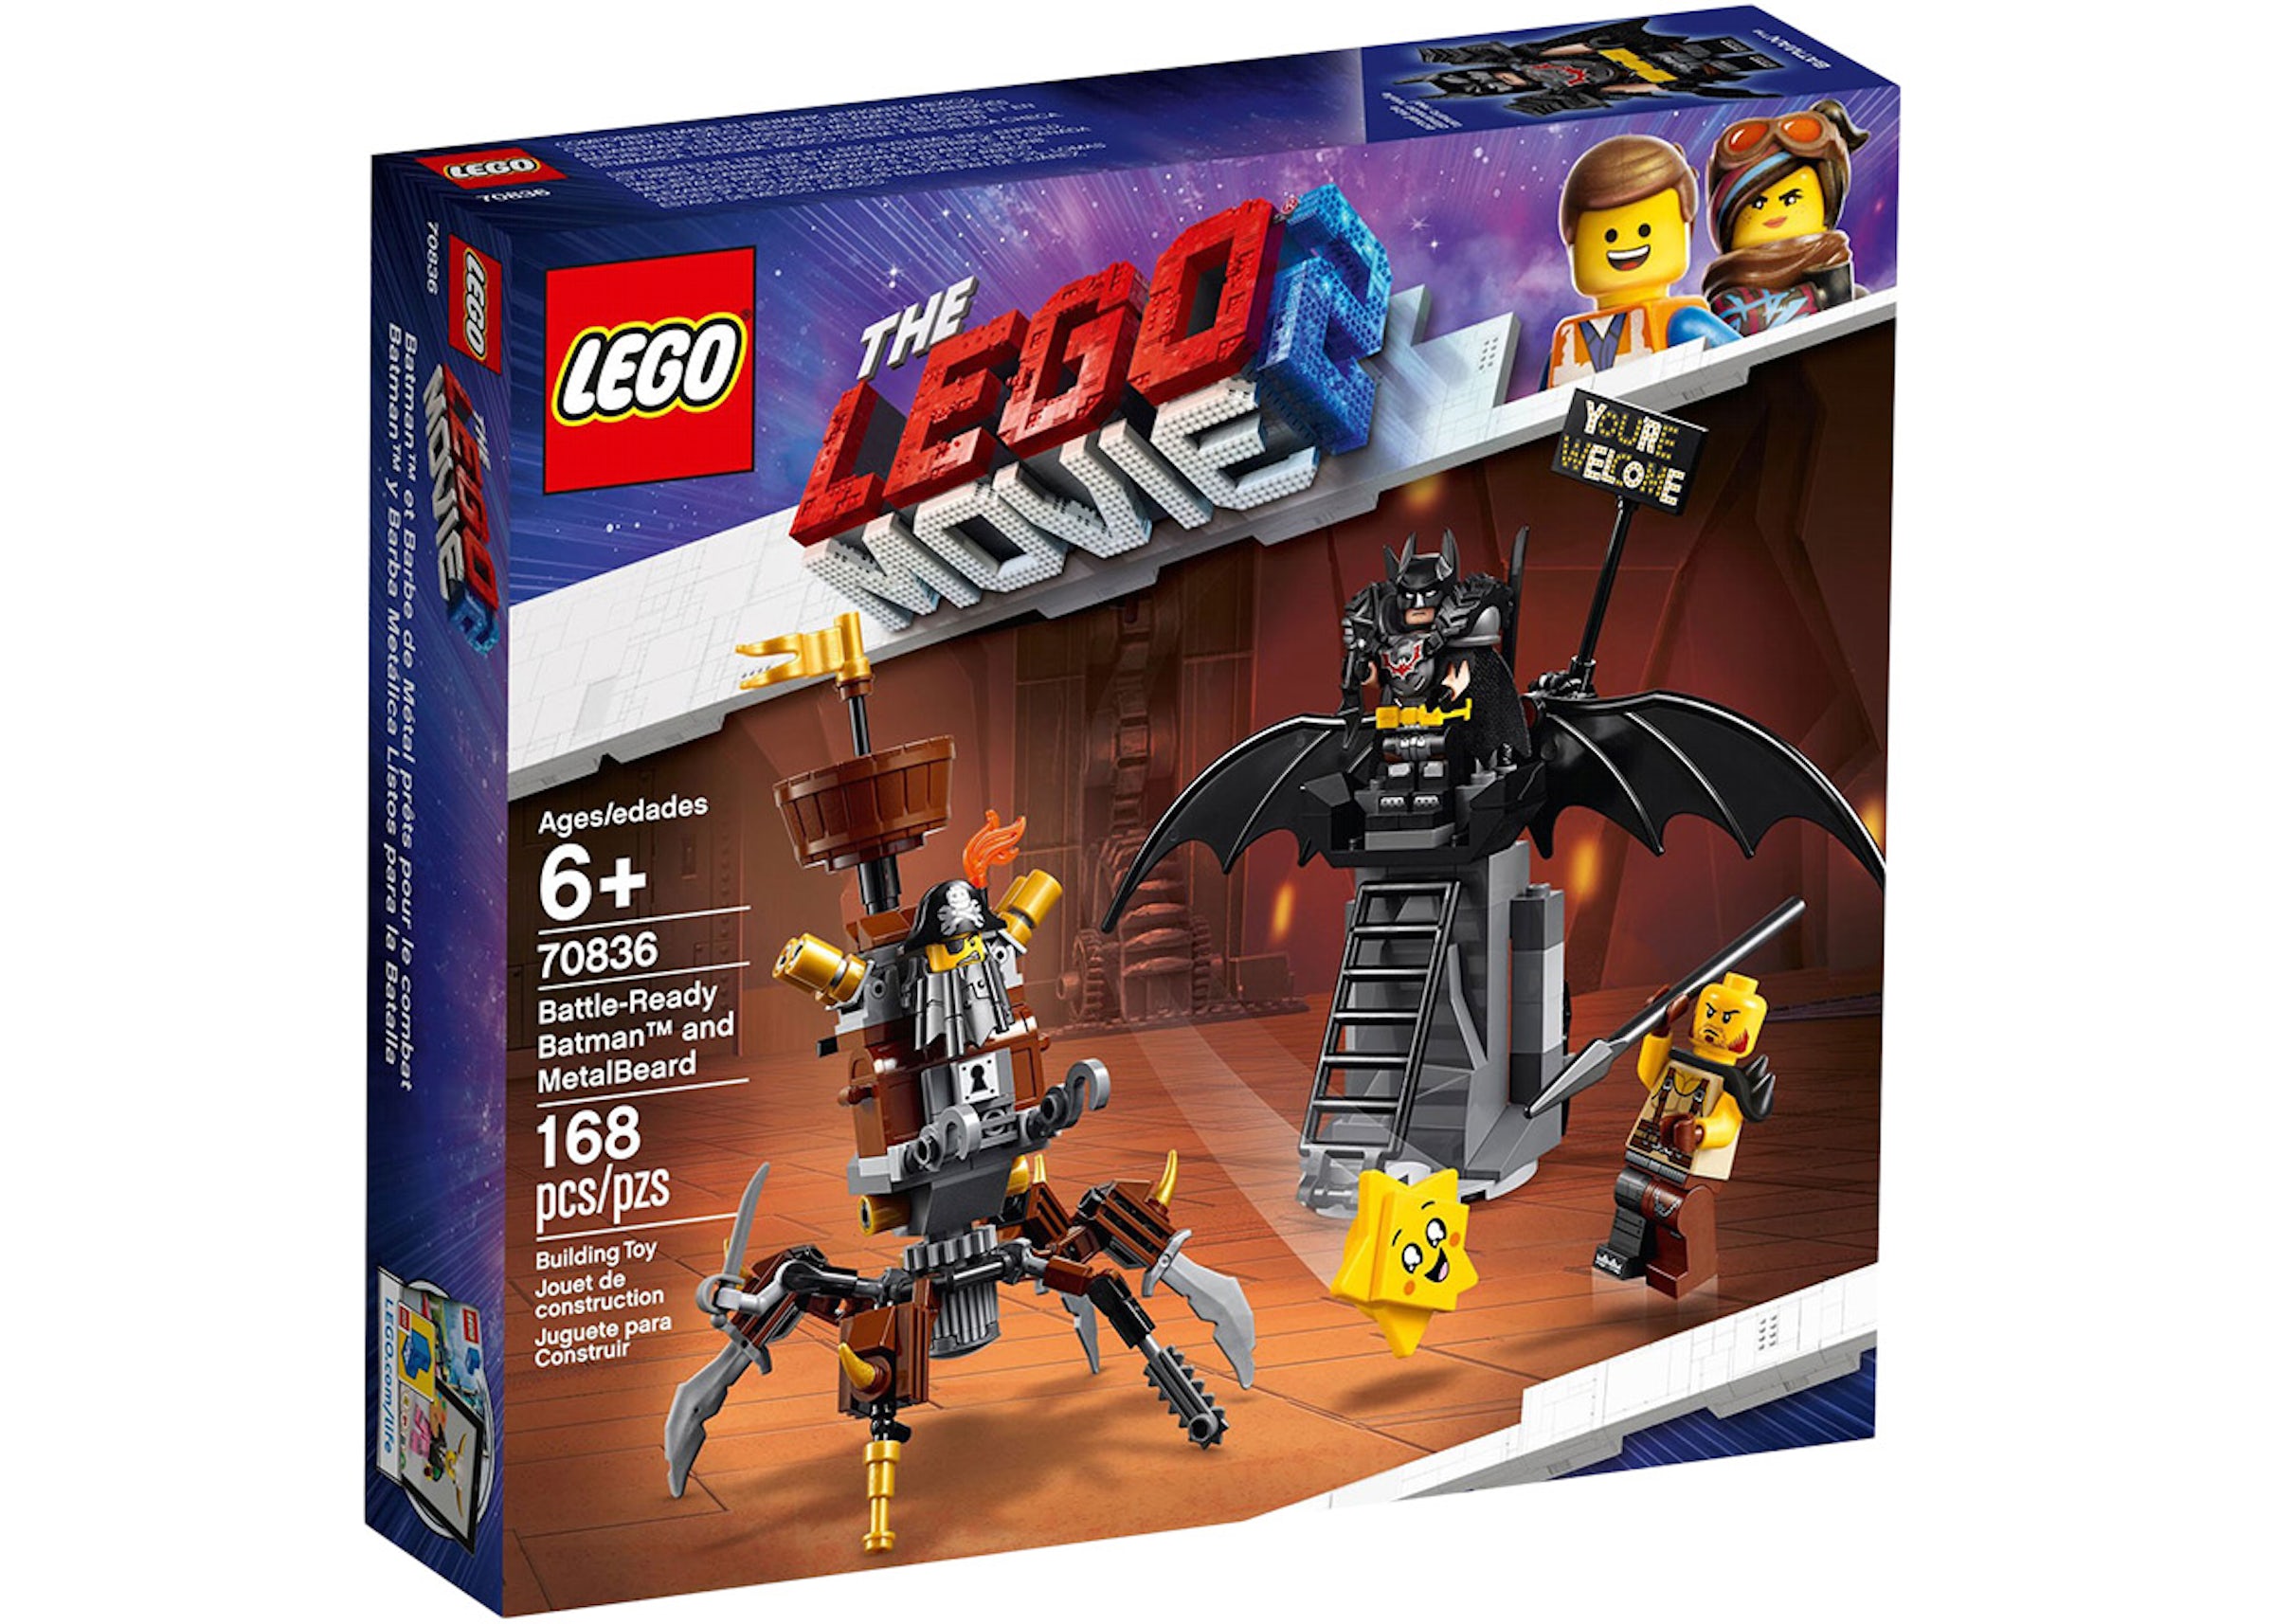 LEGO Batman Movie And LEGO Movie 2 Get New Release Dates